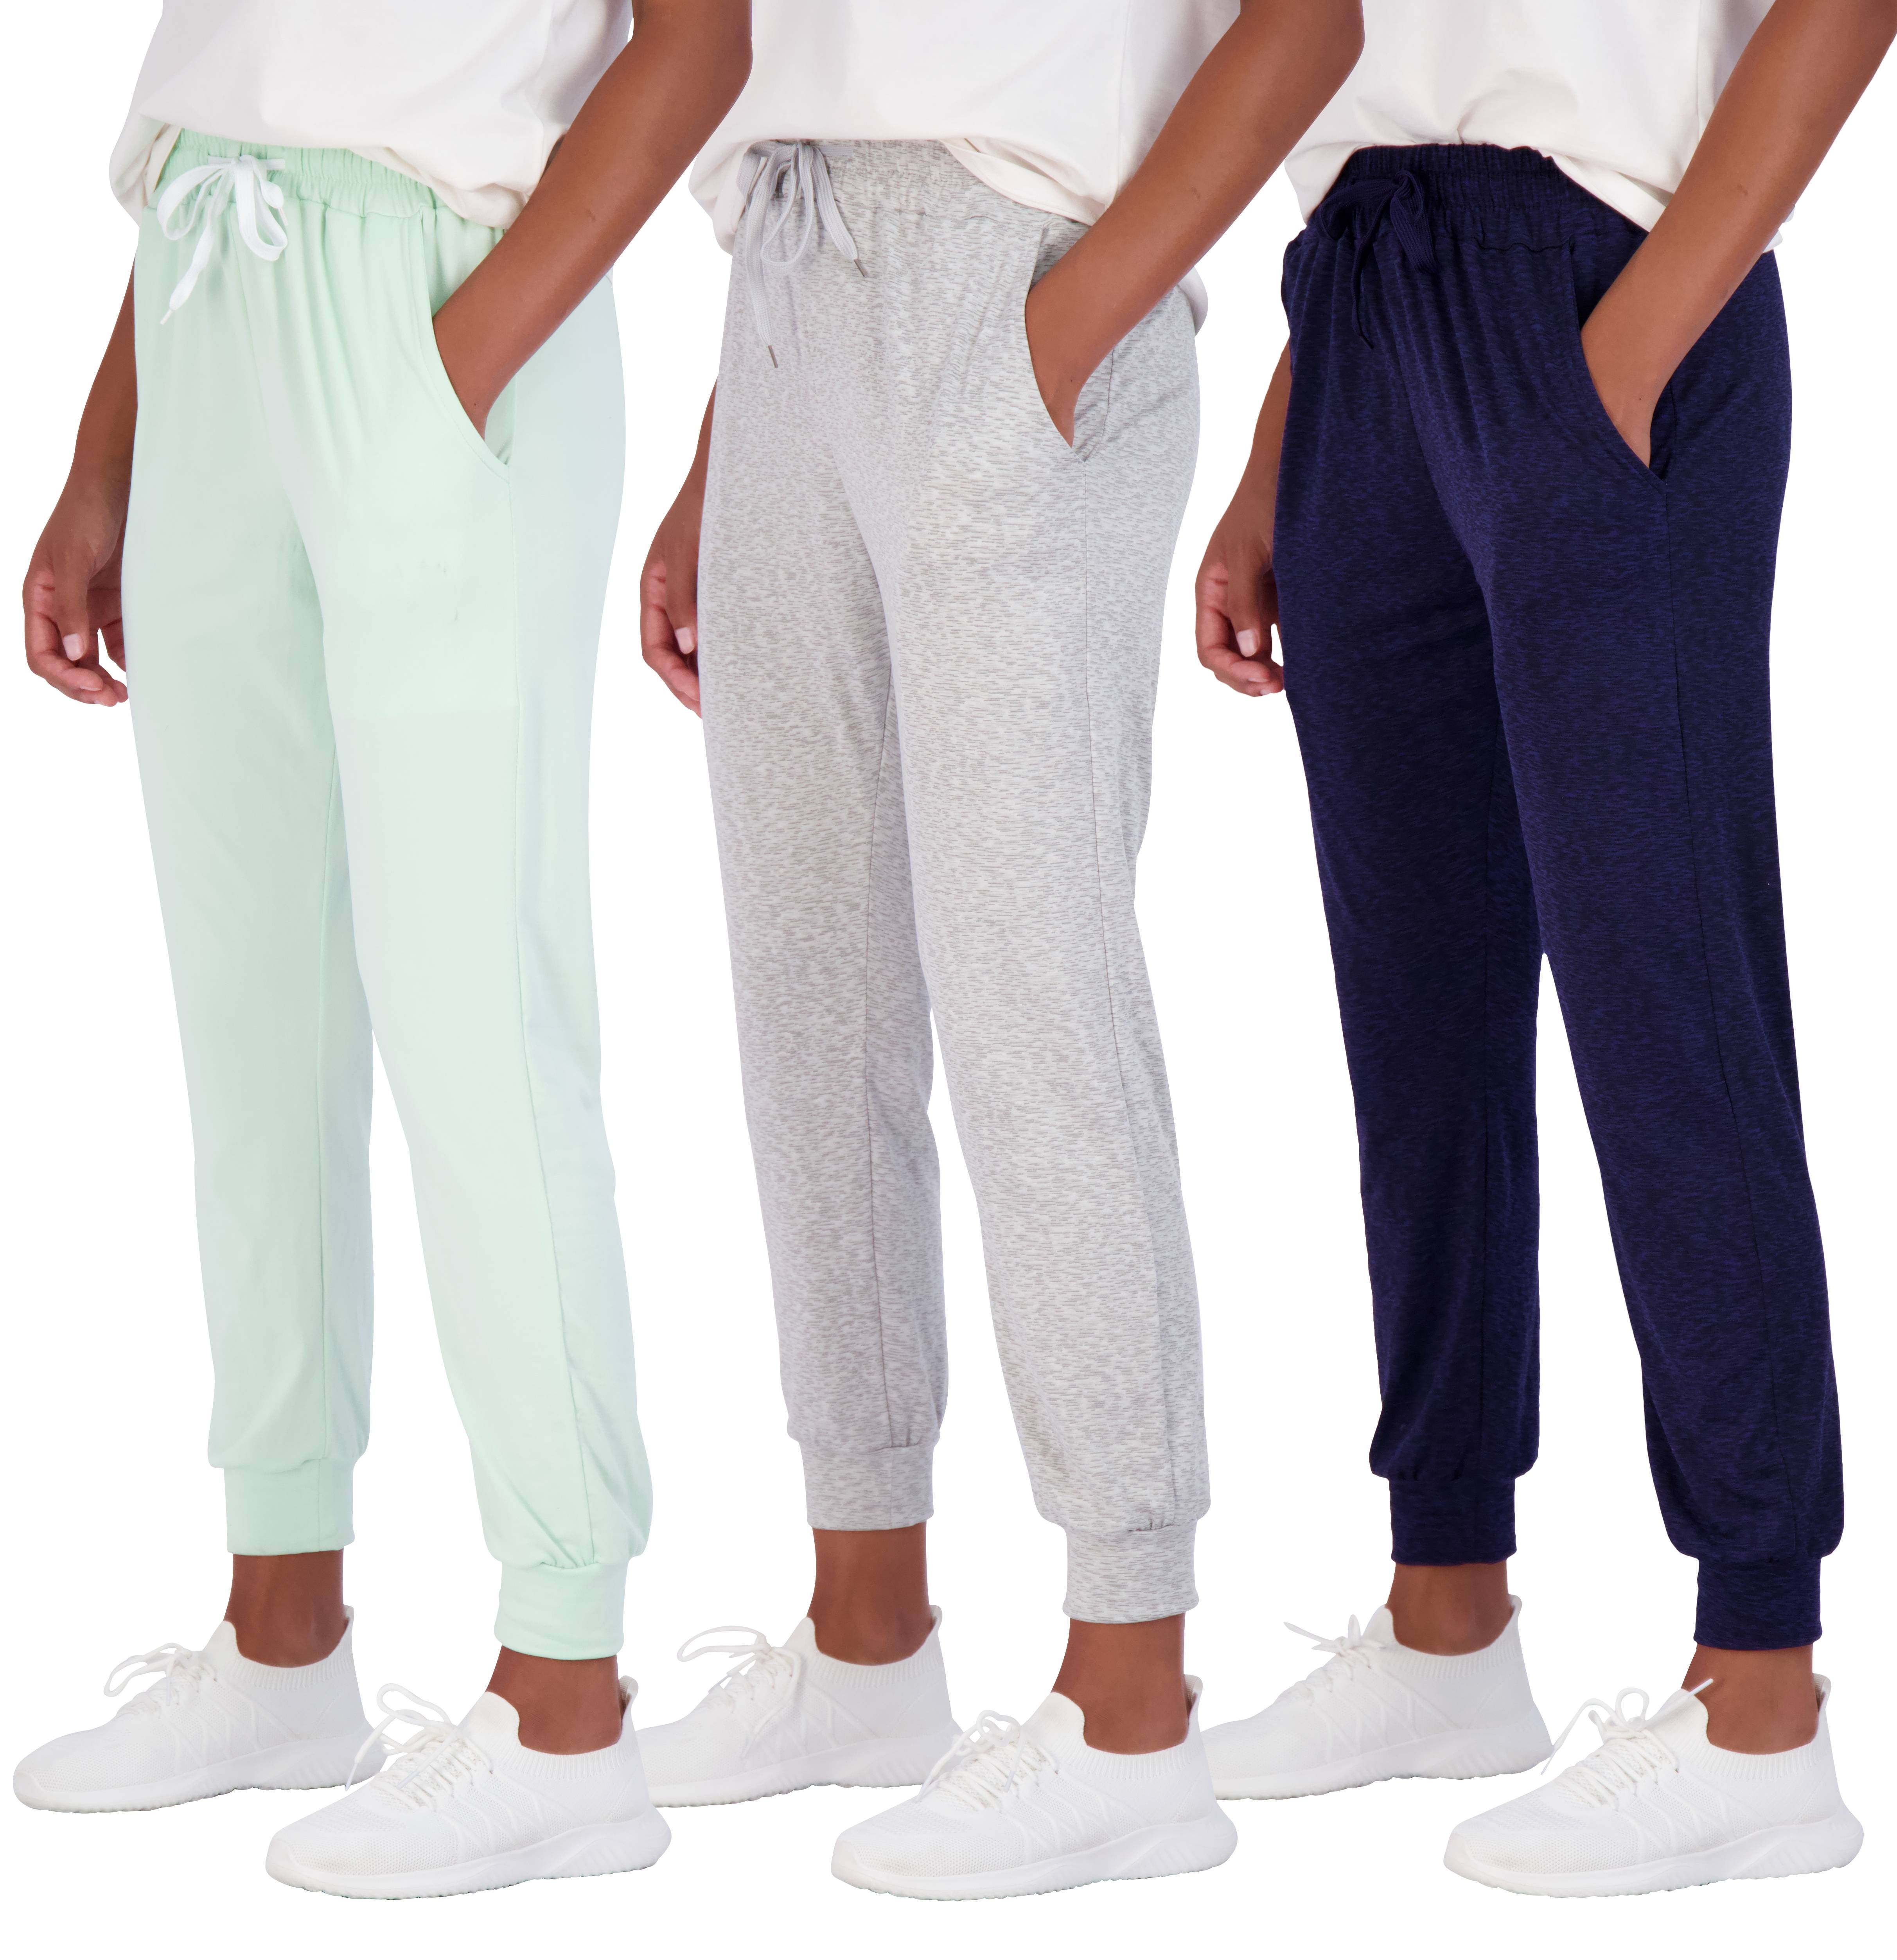 Real Essentials 3 Pack: Women's Ultra-Soft Lounge Joggers Athletic Yoga ...